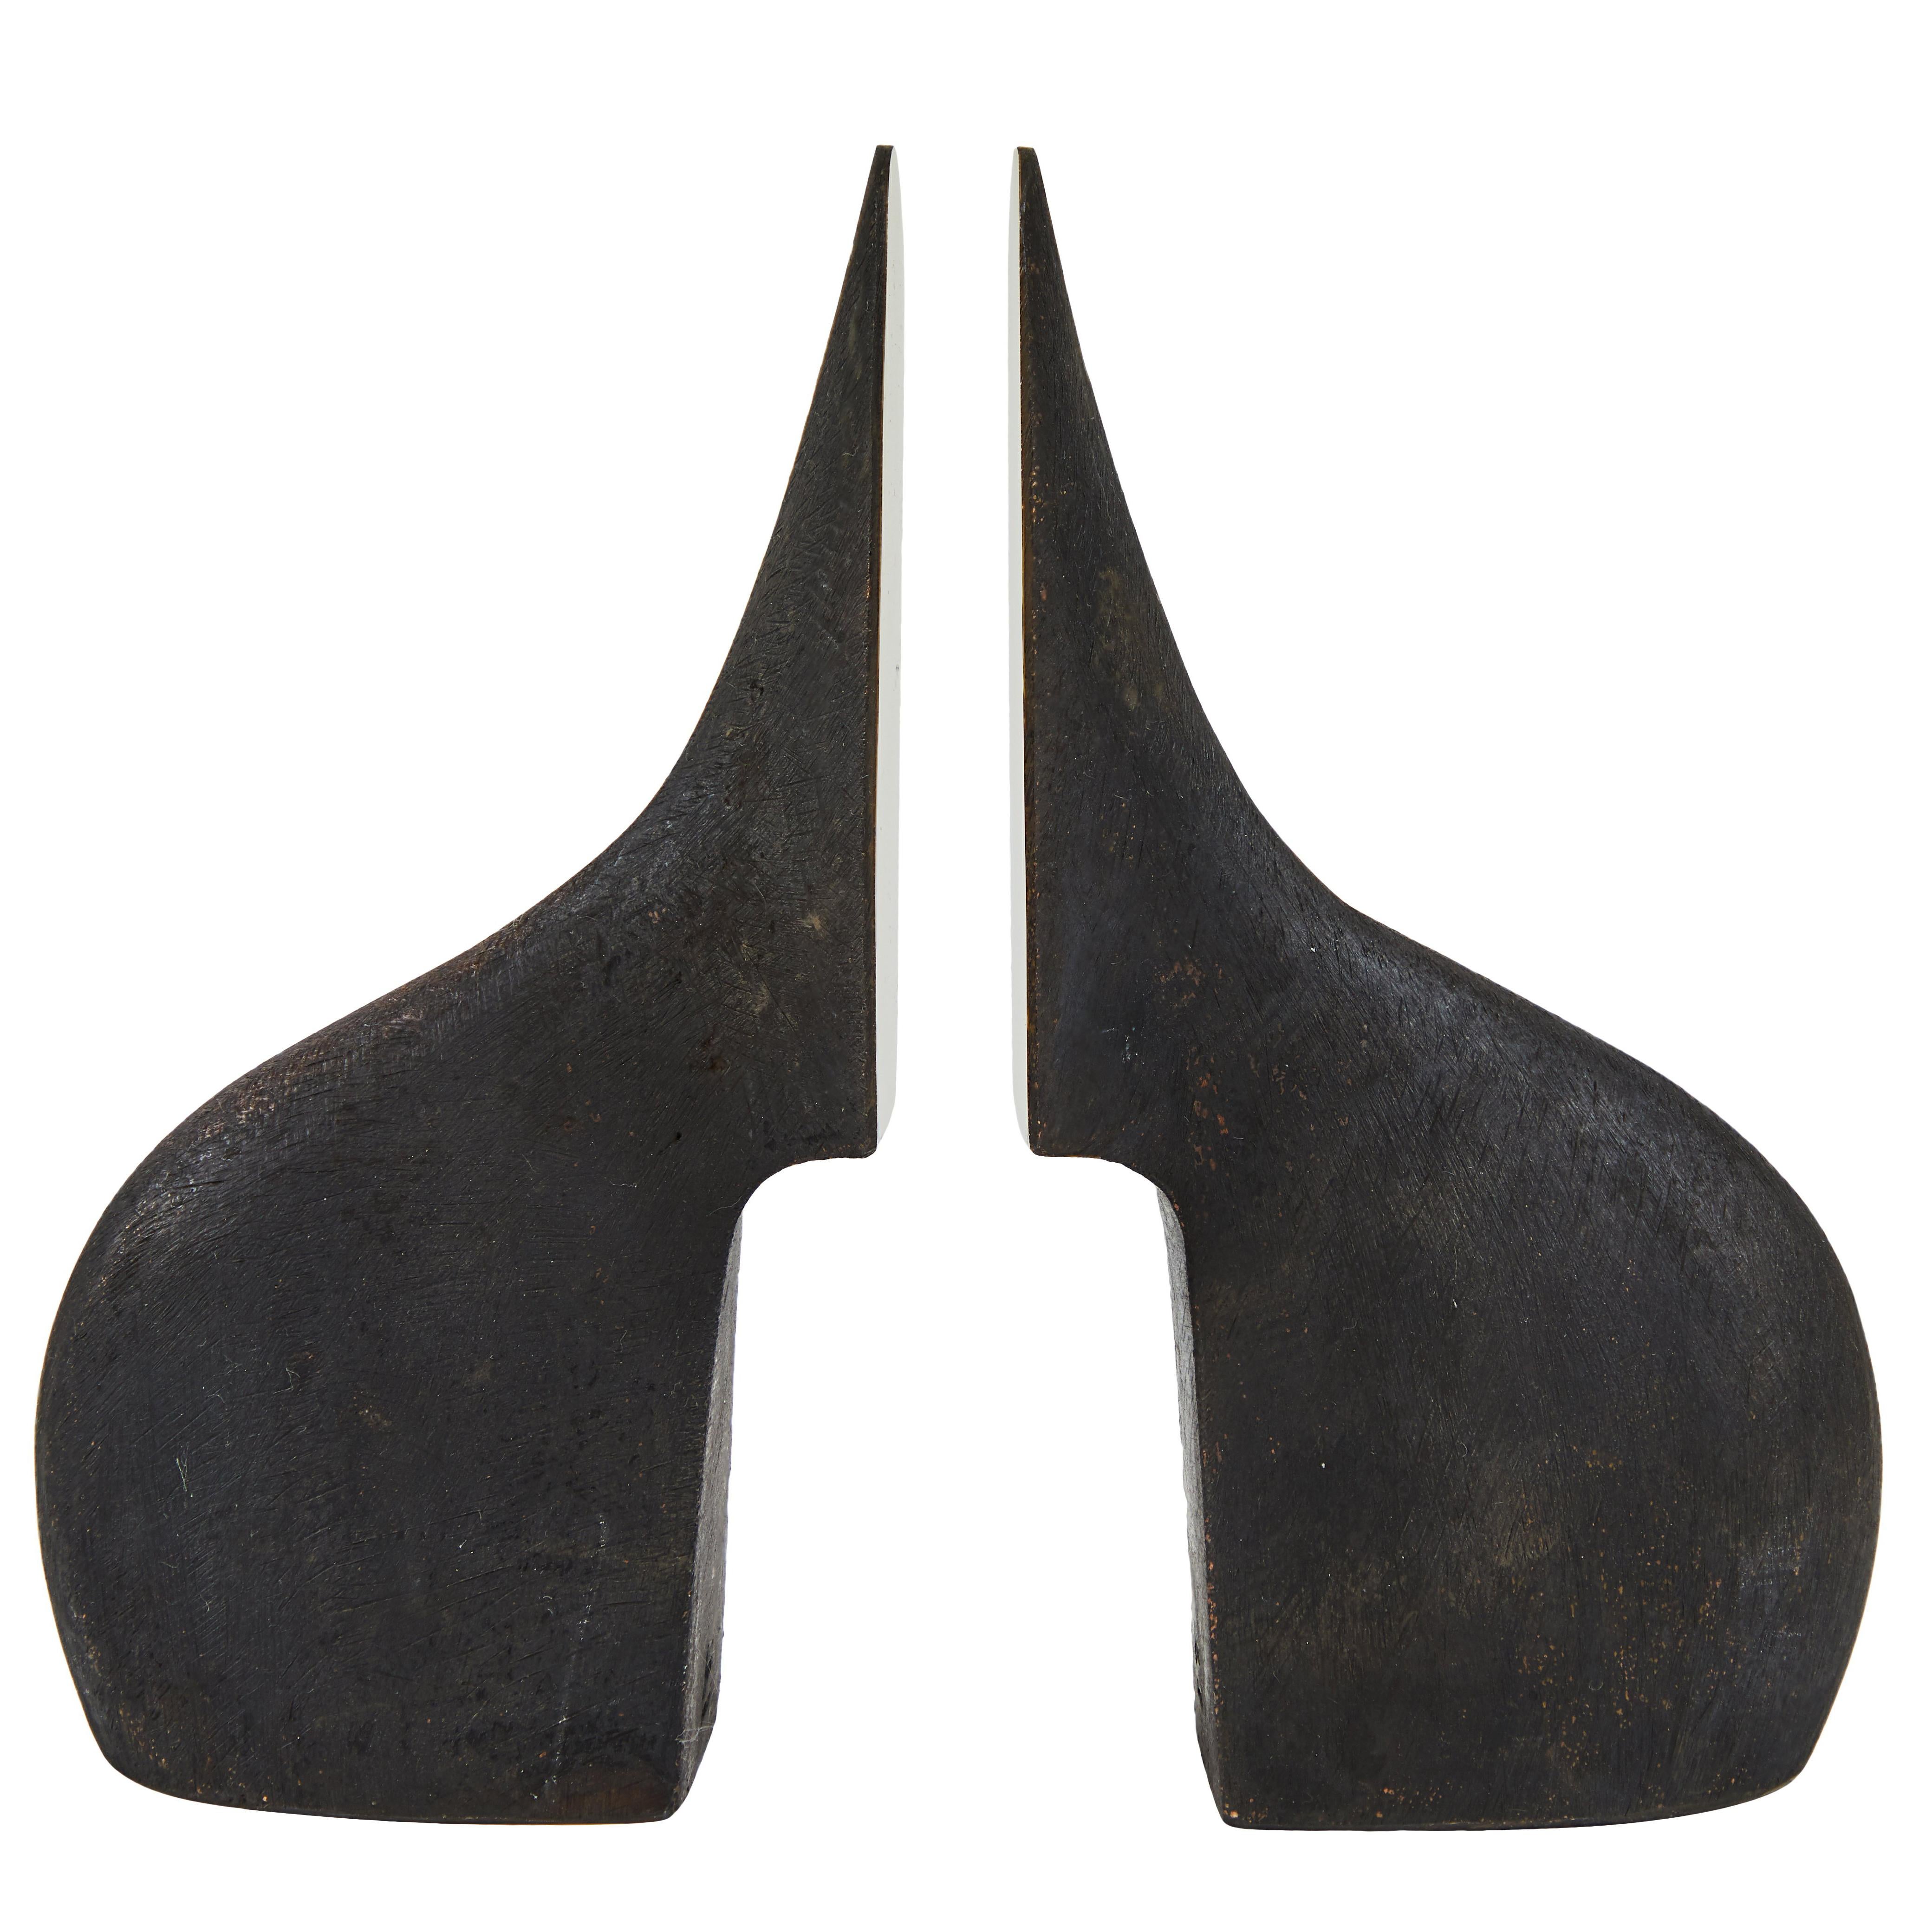 Grouping of eight Carl Auböck brass bookends. Includes one pair each of Models #3651, #3652, #3653 & #3654. Designed in the 1950s, these incredibly refined and sculptural bookends are executed in patinated and polished brass. 

Price is for the set